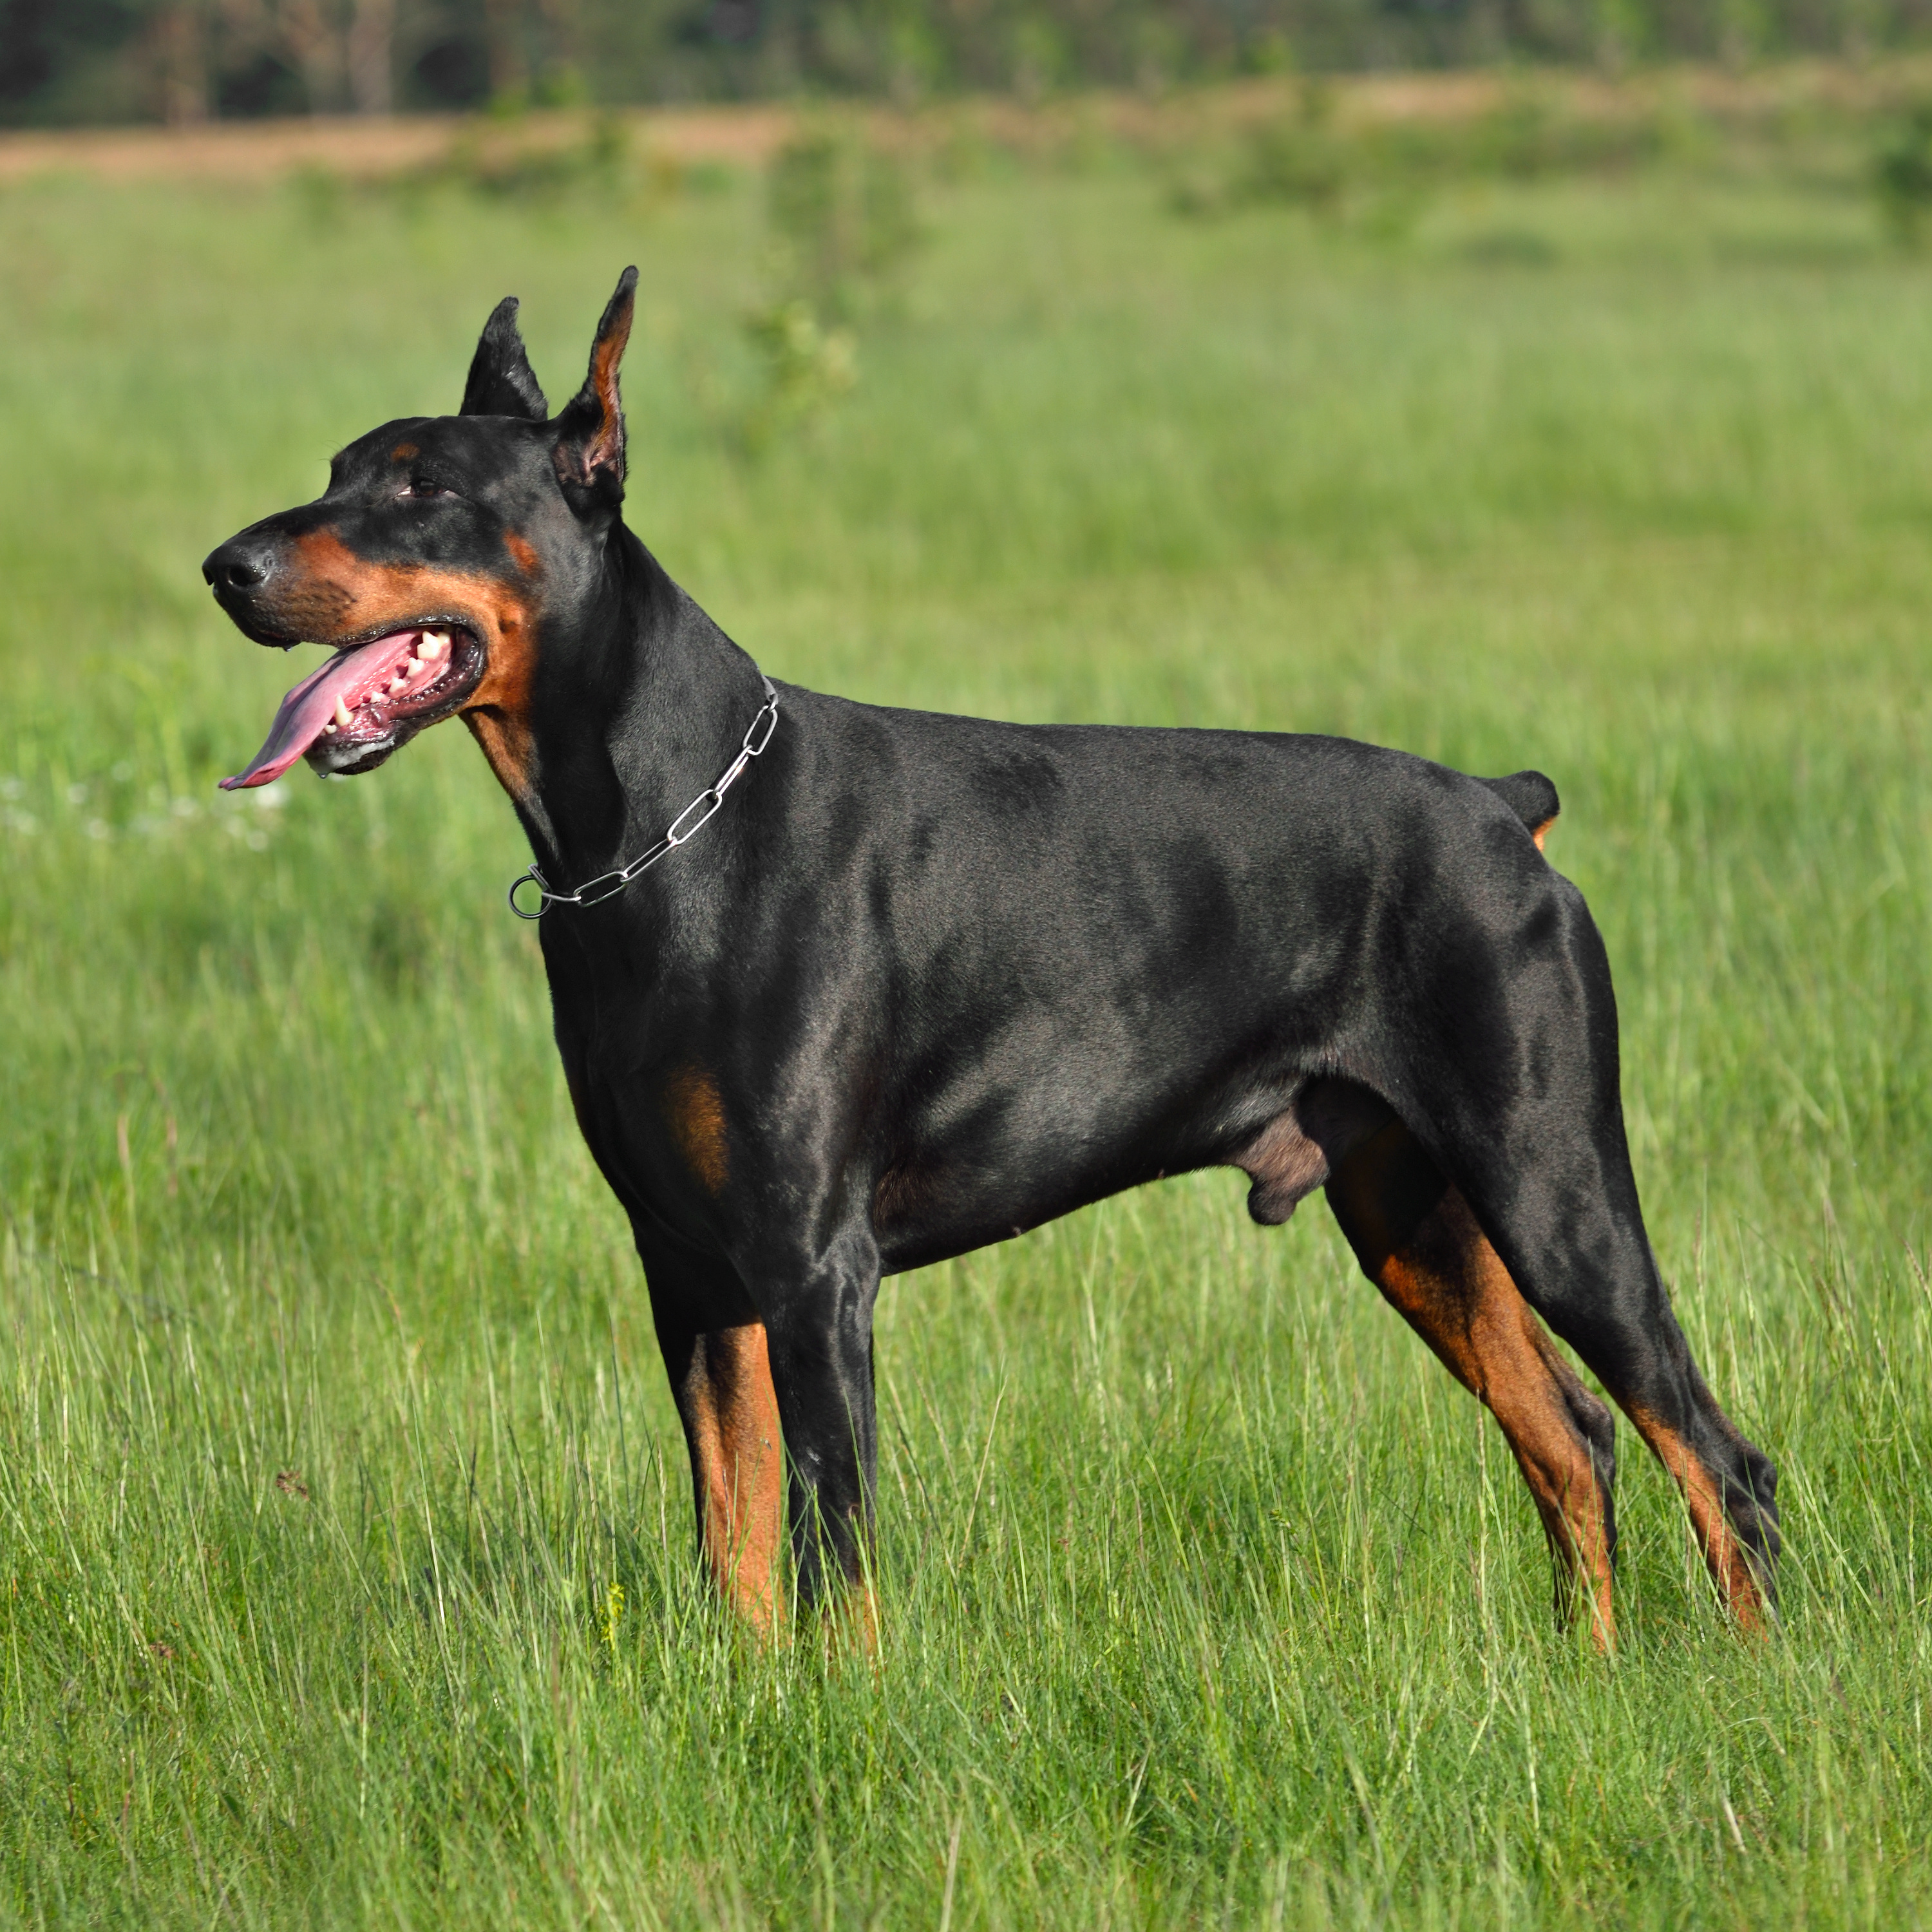 Dog Training Elite has expert Doberman training in Indianapolis, IN
																															 that are experienced in a variety of positive training methods for Dobermans.